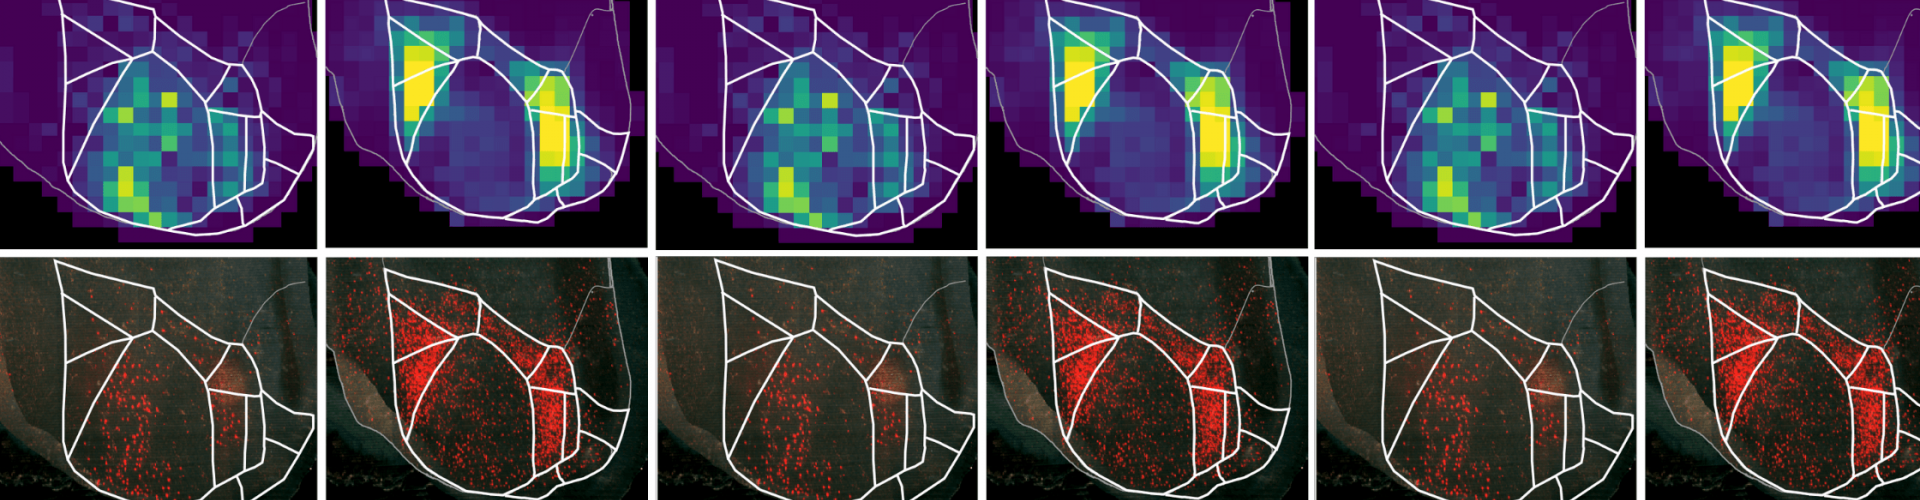 Mouse primary and higher visual areas seen from the top. Sonja Hofer and her team at the SWC are trying to uncover the precise organisation and function of a higher-order thalamic nucleus called the pulvinar, which is the largest thalamic area in humans and is strongly interconnected with the part of the cerebral cortex responsible for vision. 